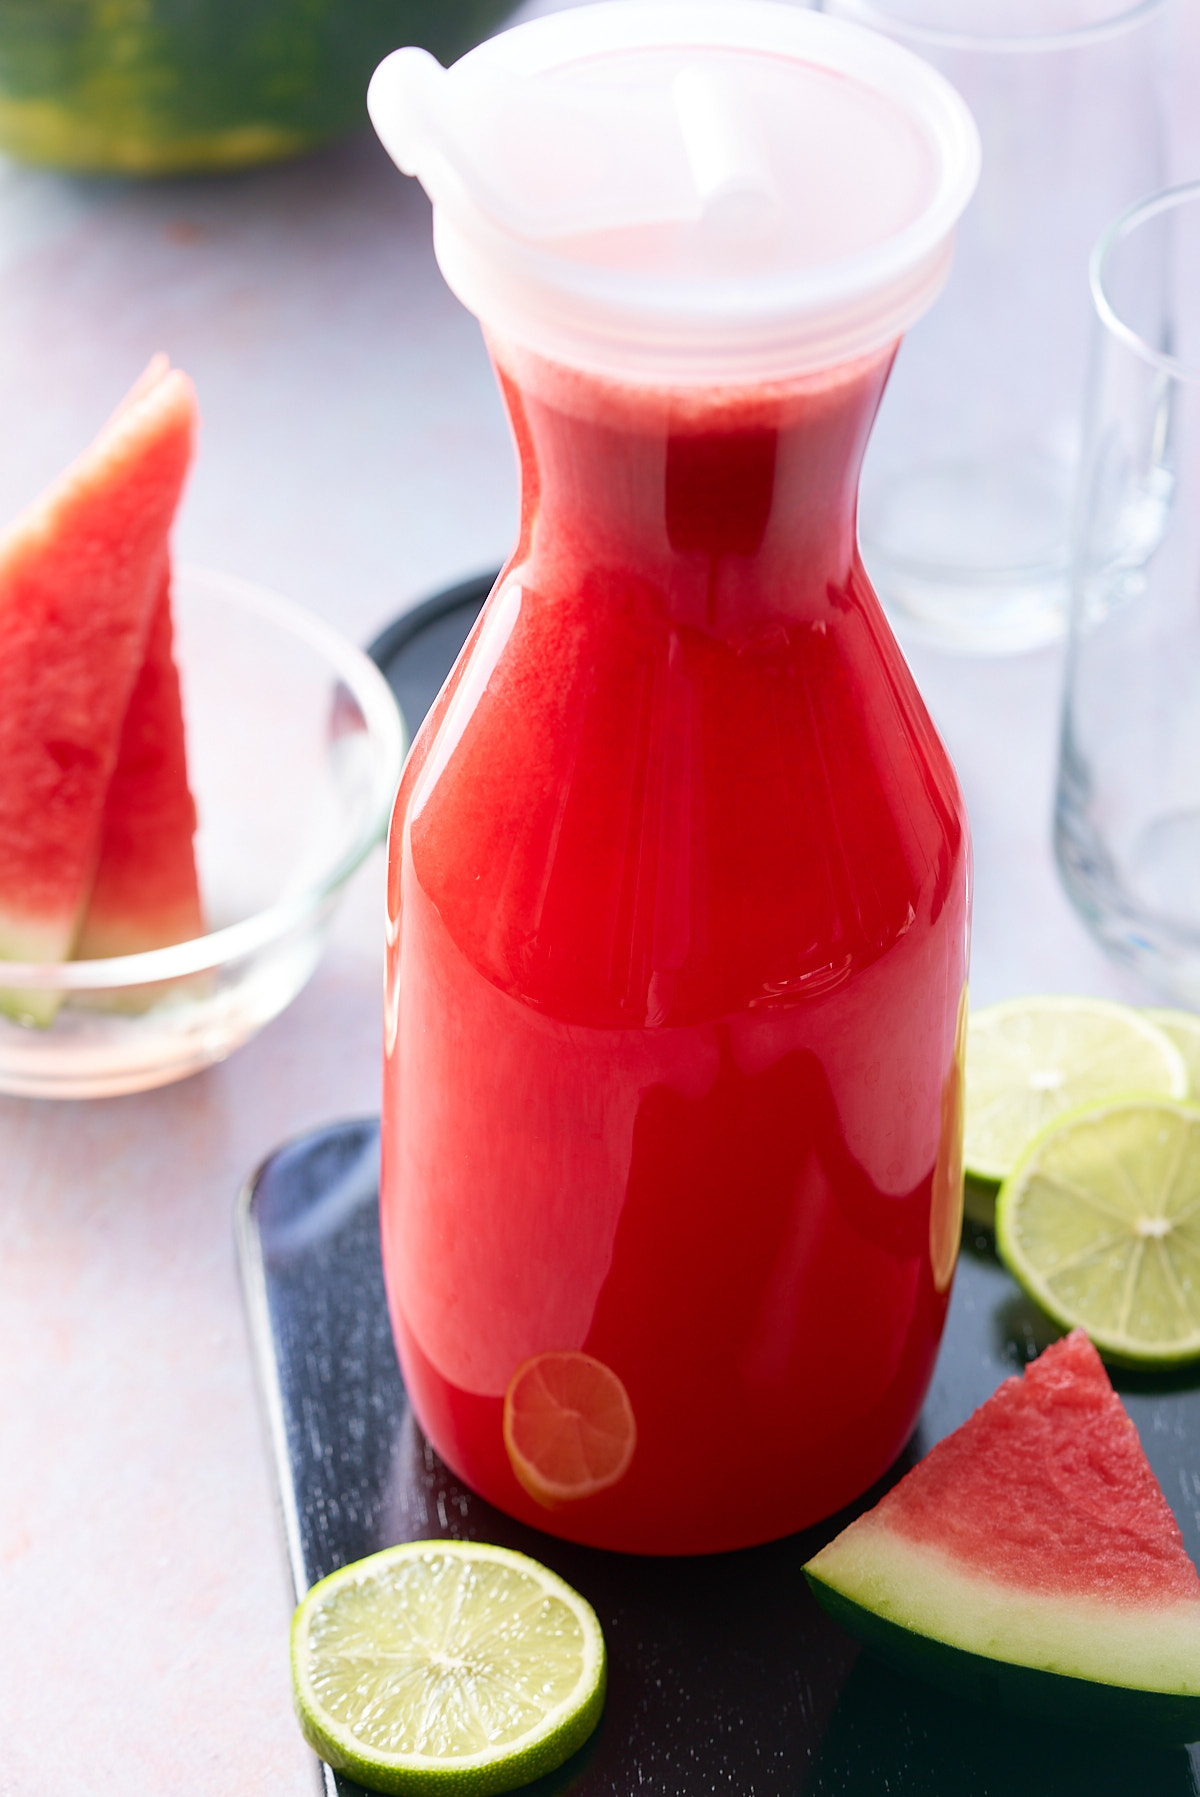 A glass jug filled with watermelon juice with wedges of fresh watermelon and slices of lime set alongside.